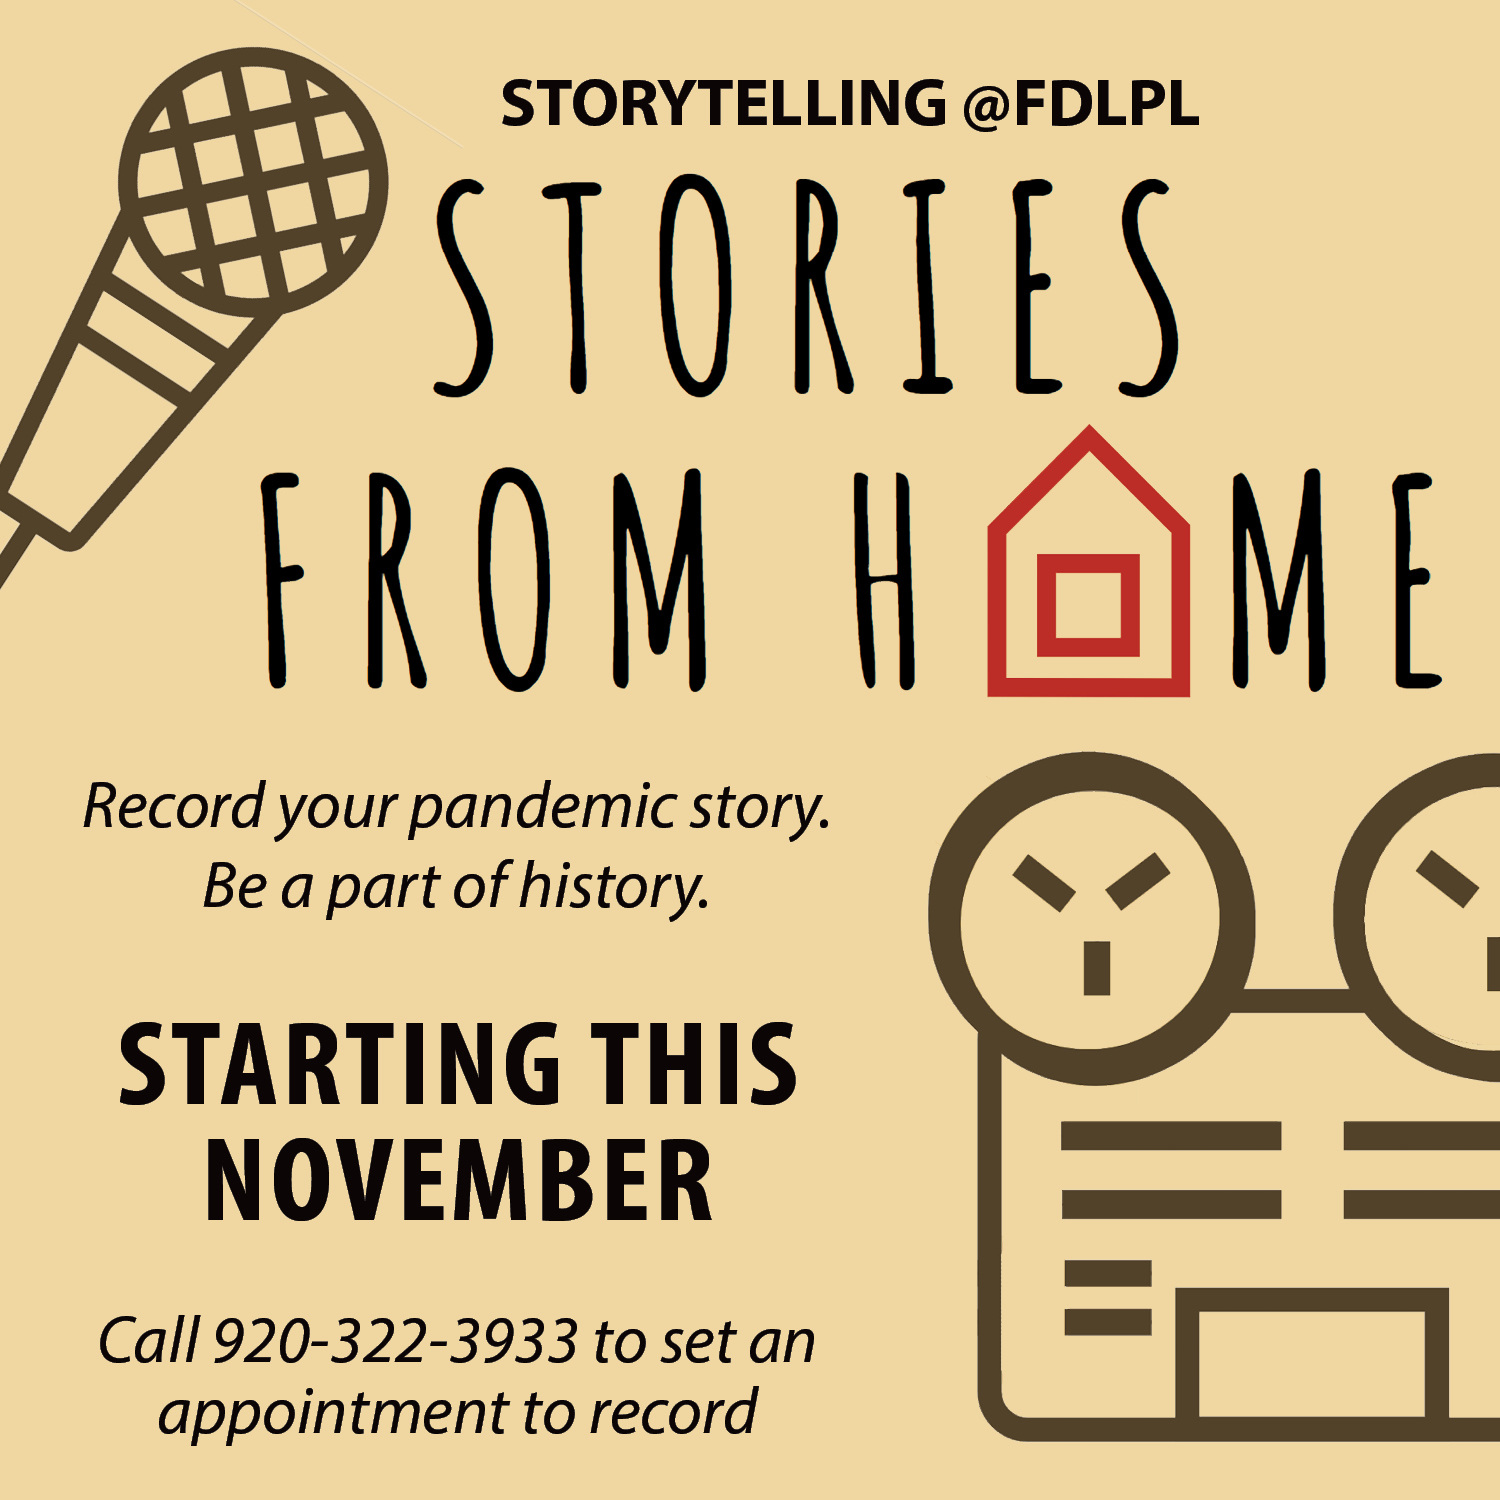 Community invited to share pandemic stories for new history initiative